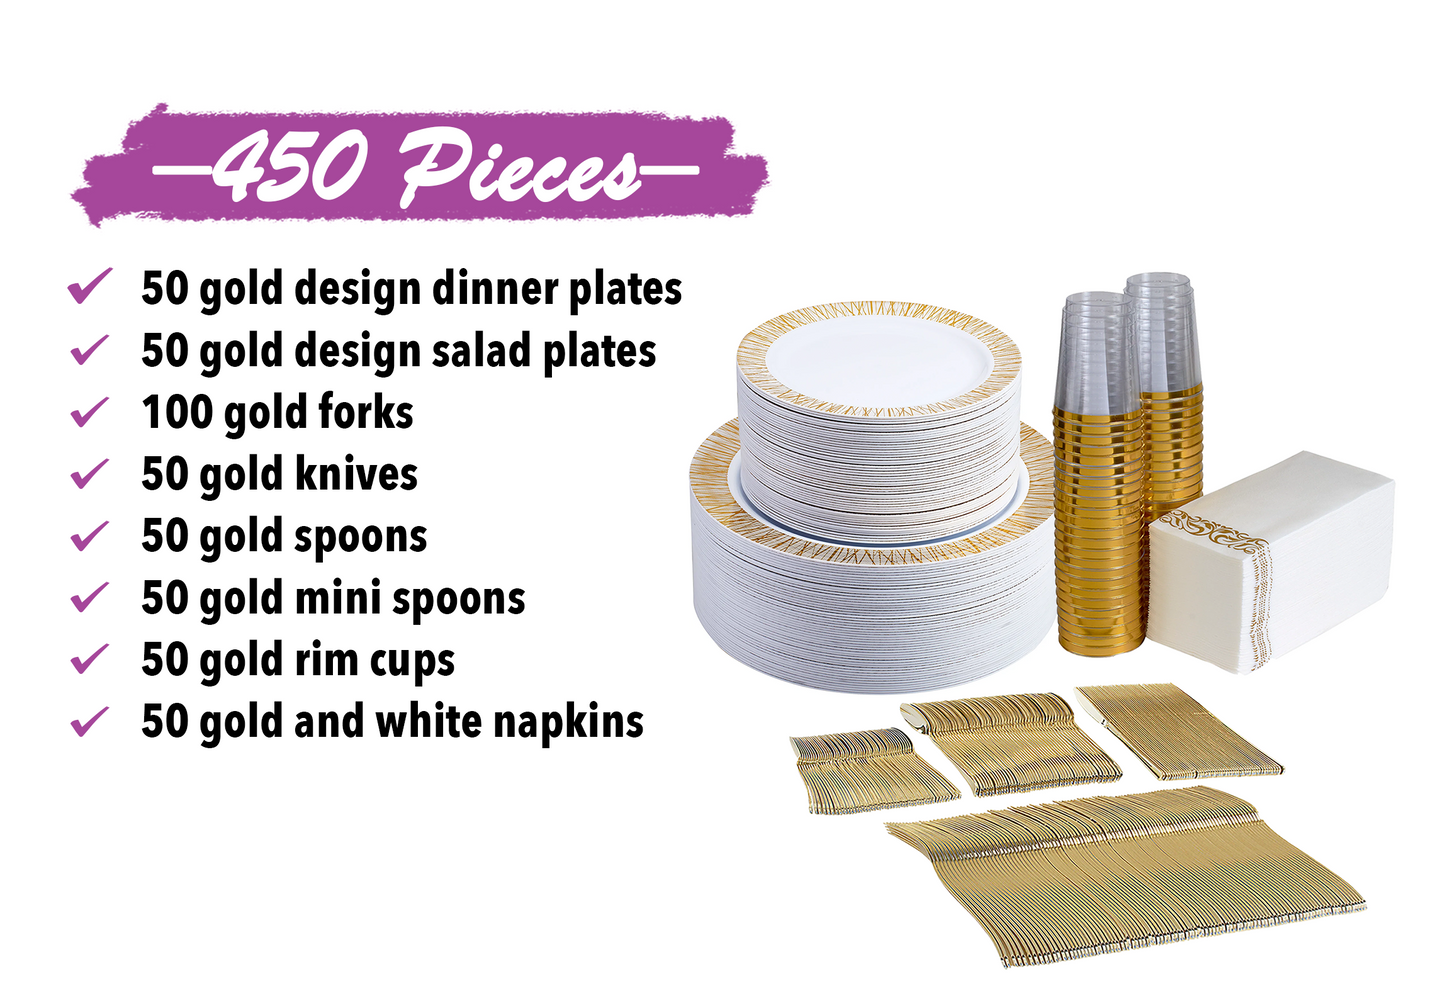 450 -Piece gold dinnerware set for 50 guests Includes: 100 gold design plastic plates, 250 gold plastic silverware utensils, 50 napkins & 50 cups